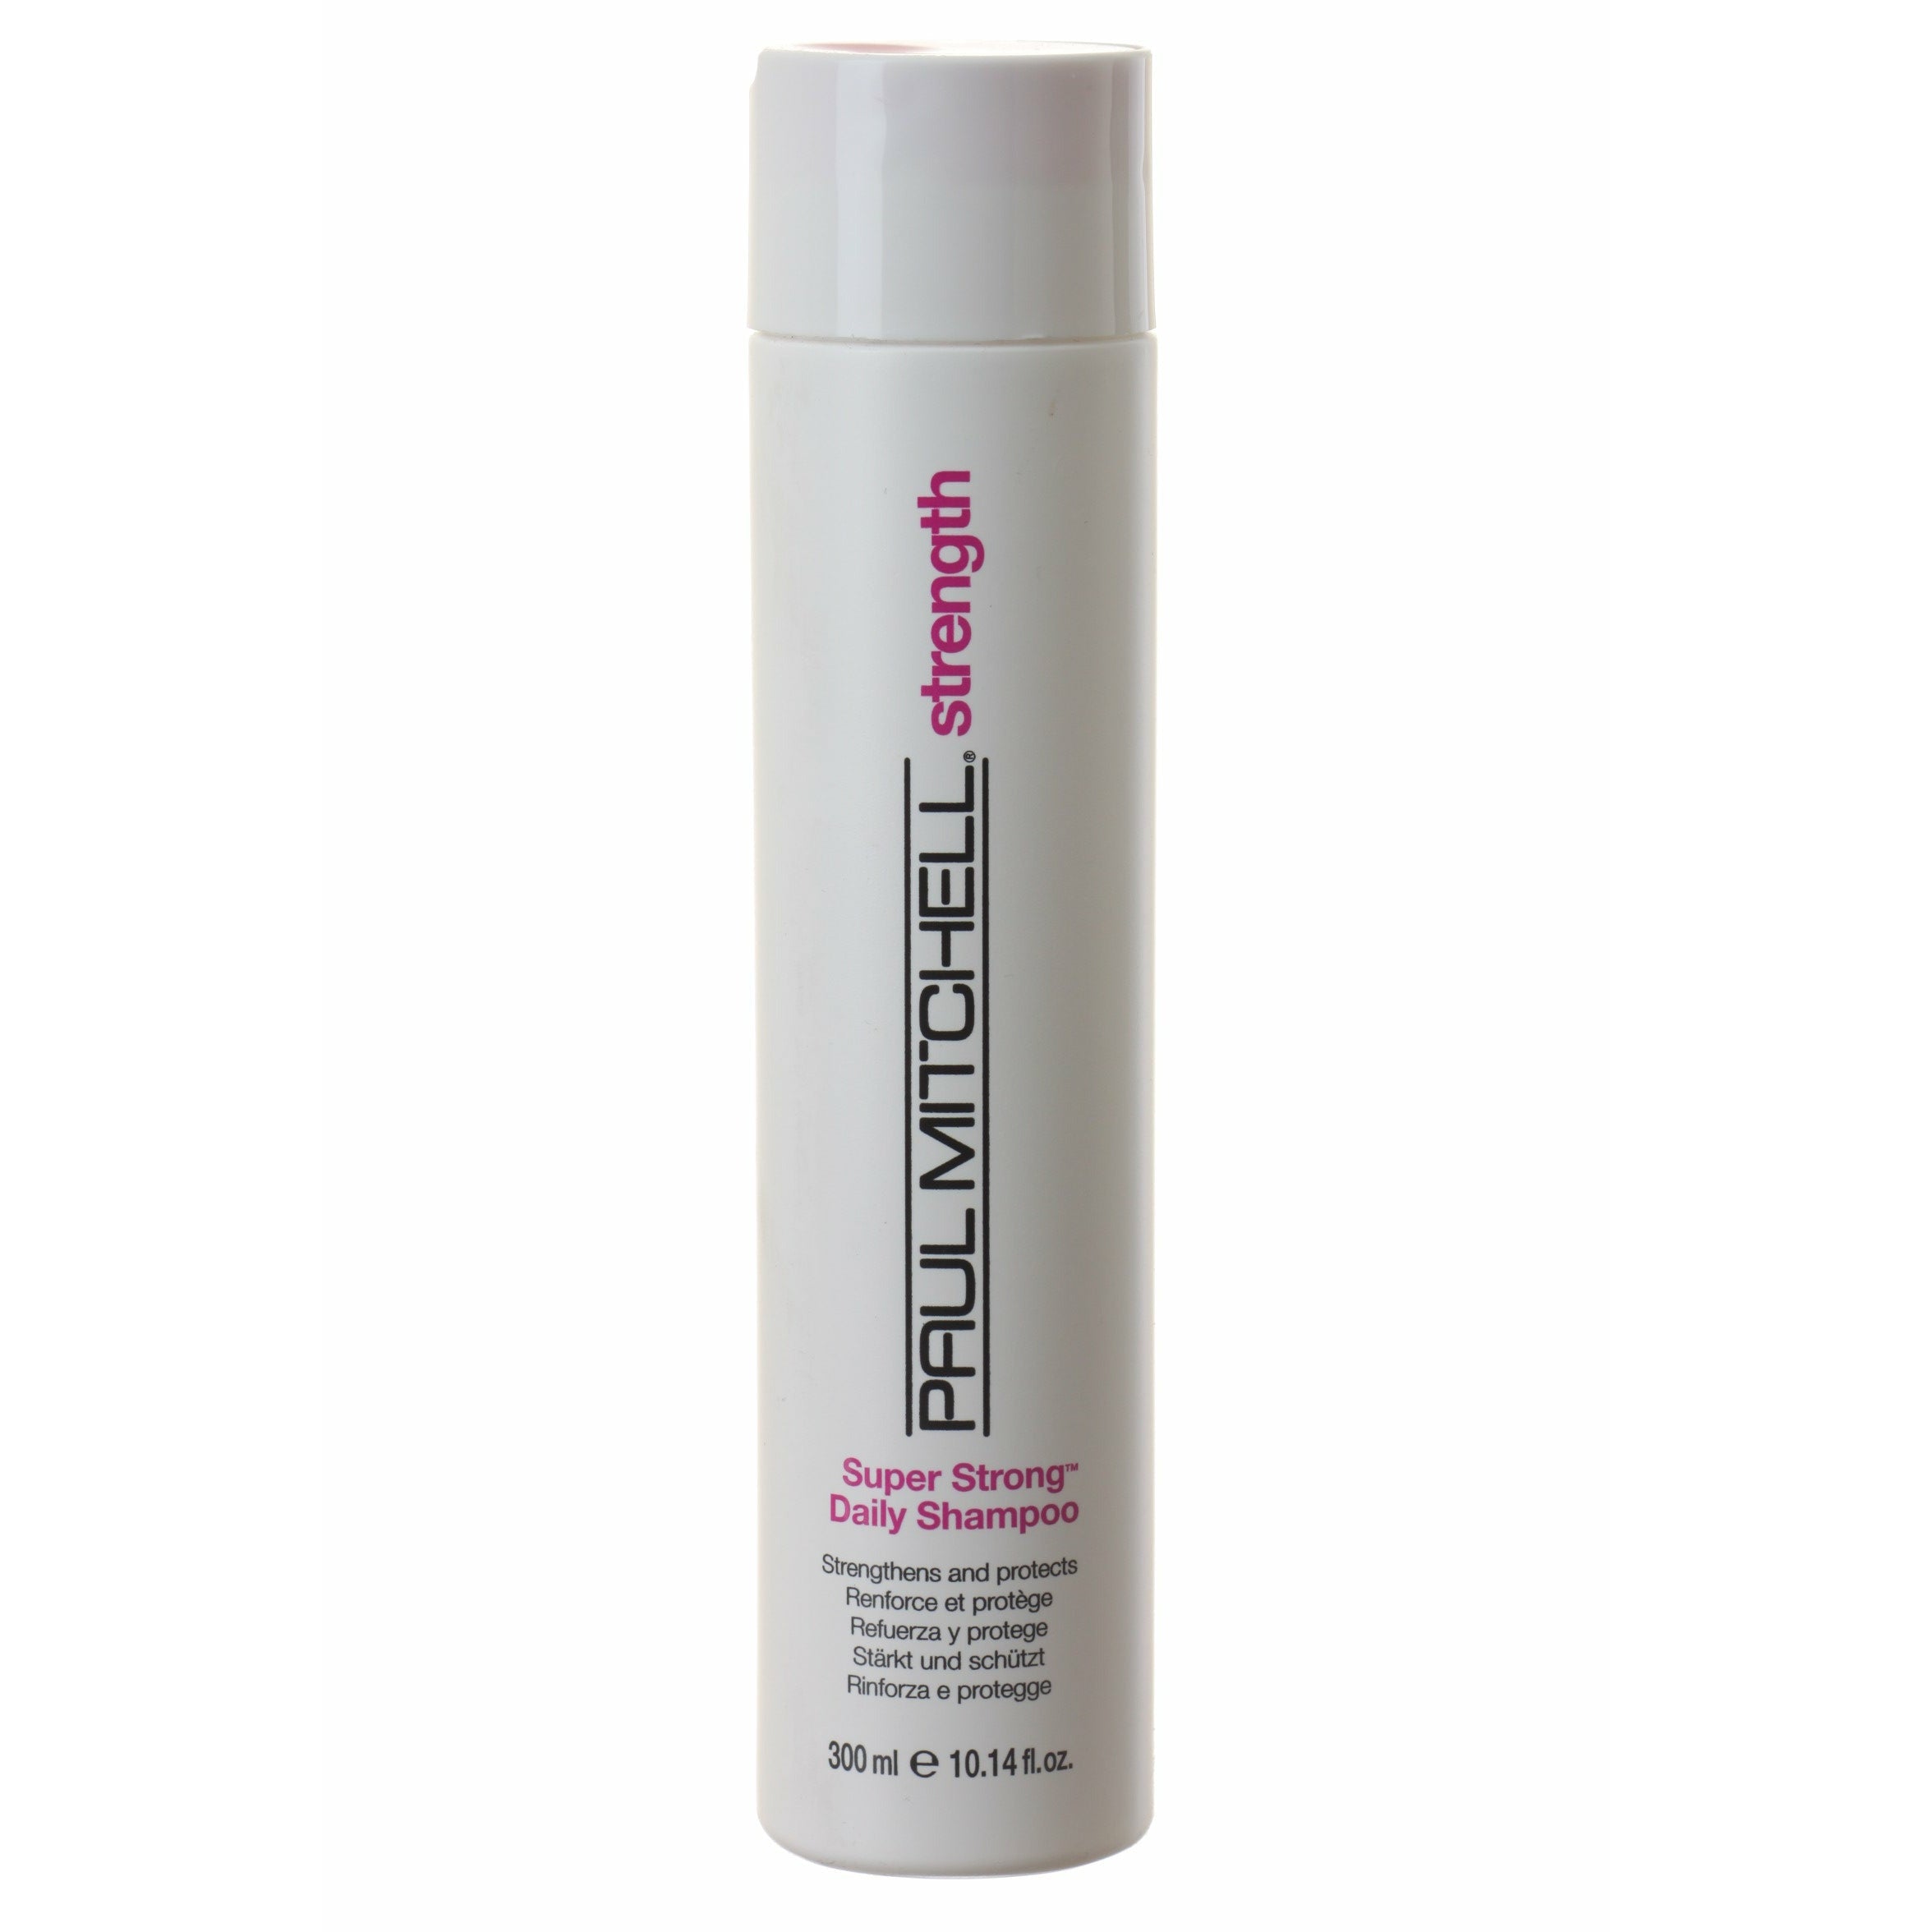 Daggry spyd regn Paul Mitchell Super Strong Daily Shampoo 10.14 oz – Hair Care & Beauty